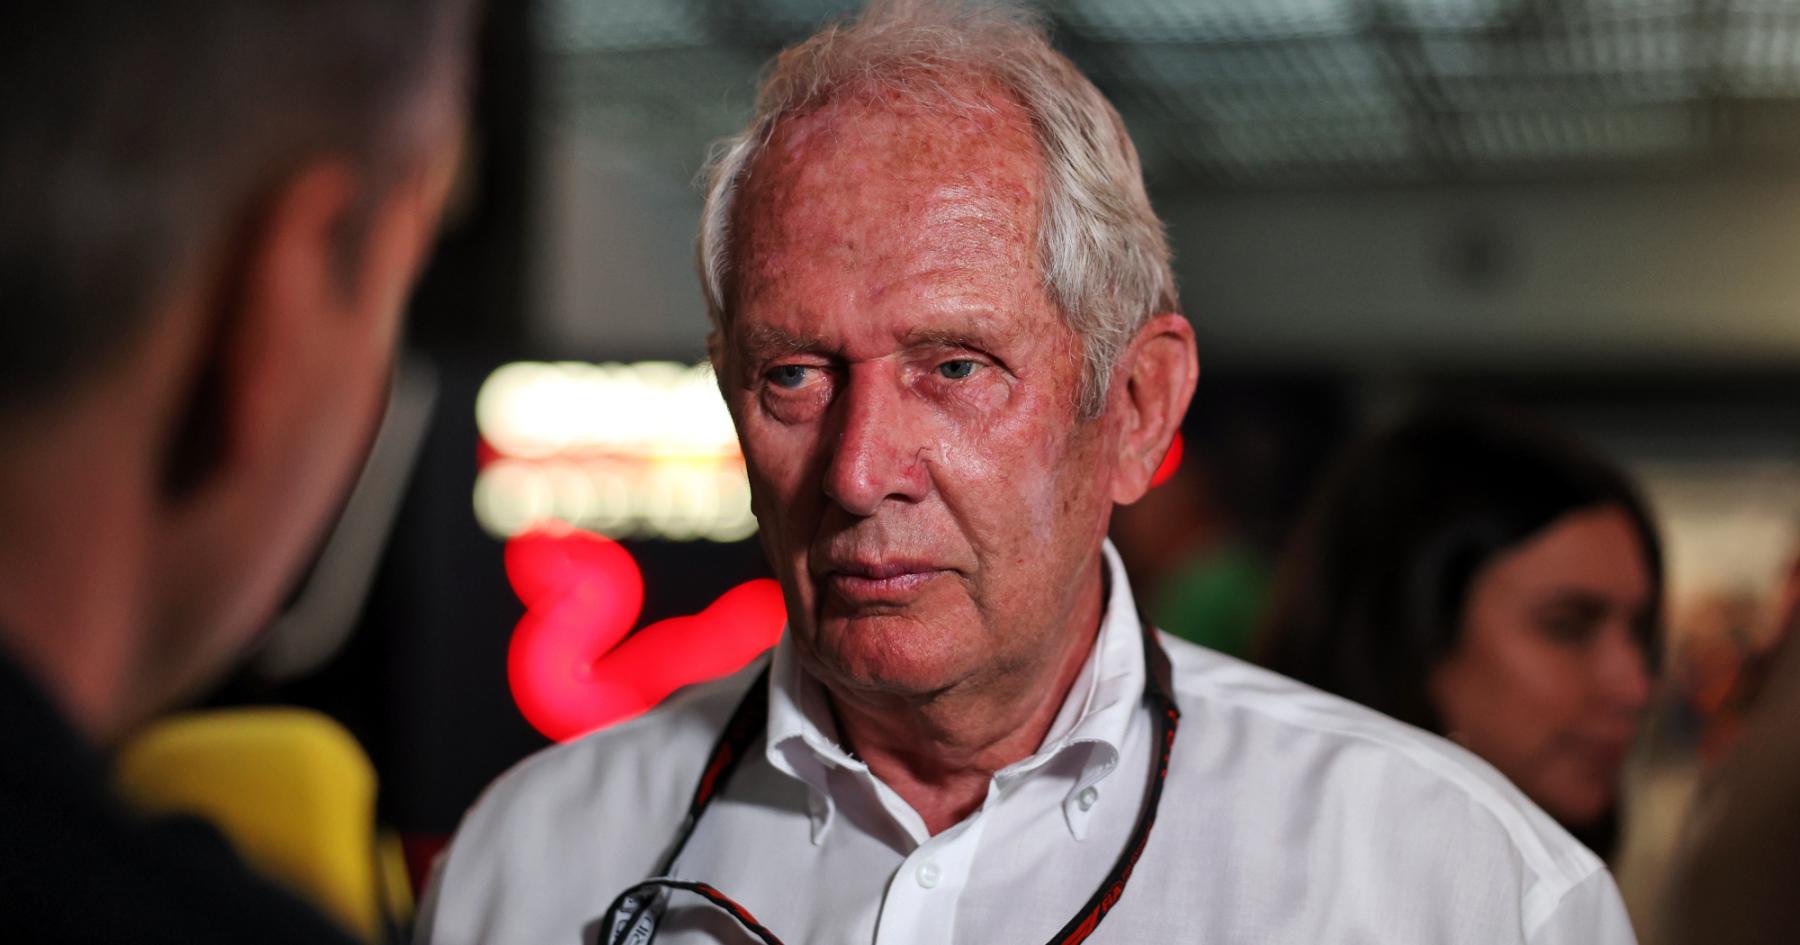 The Inside Scoop: Marko's Revelation on Newey's Departure from Red Bull Racing